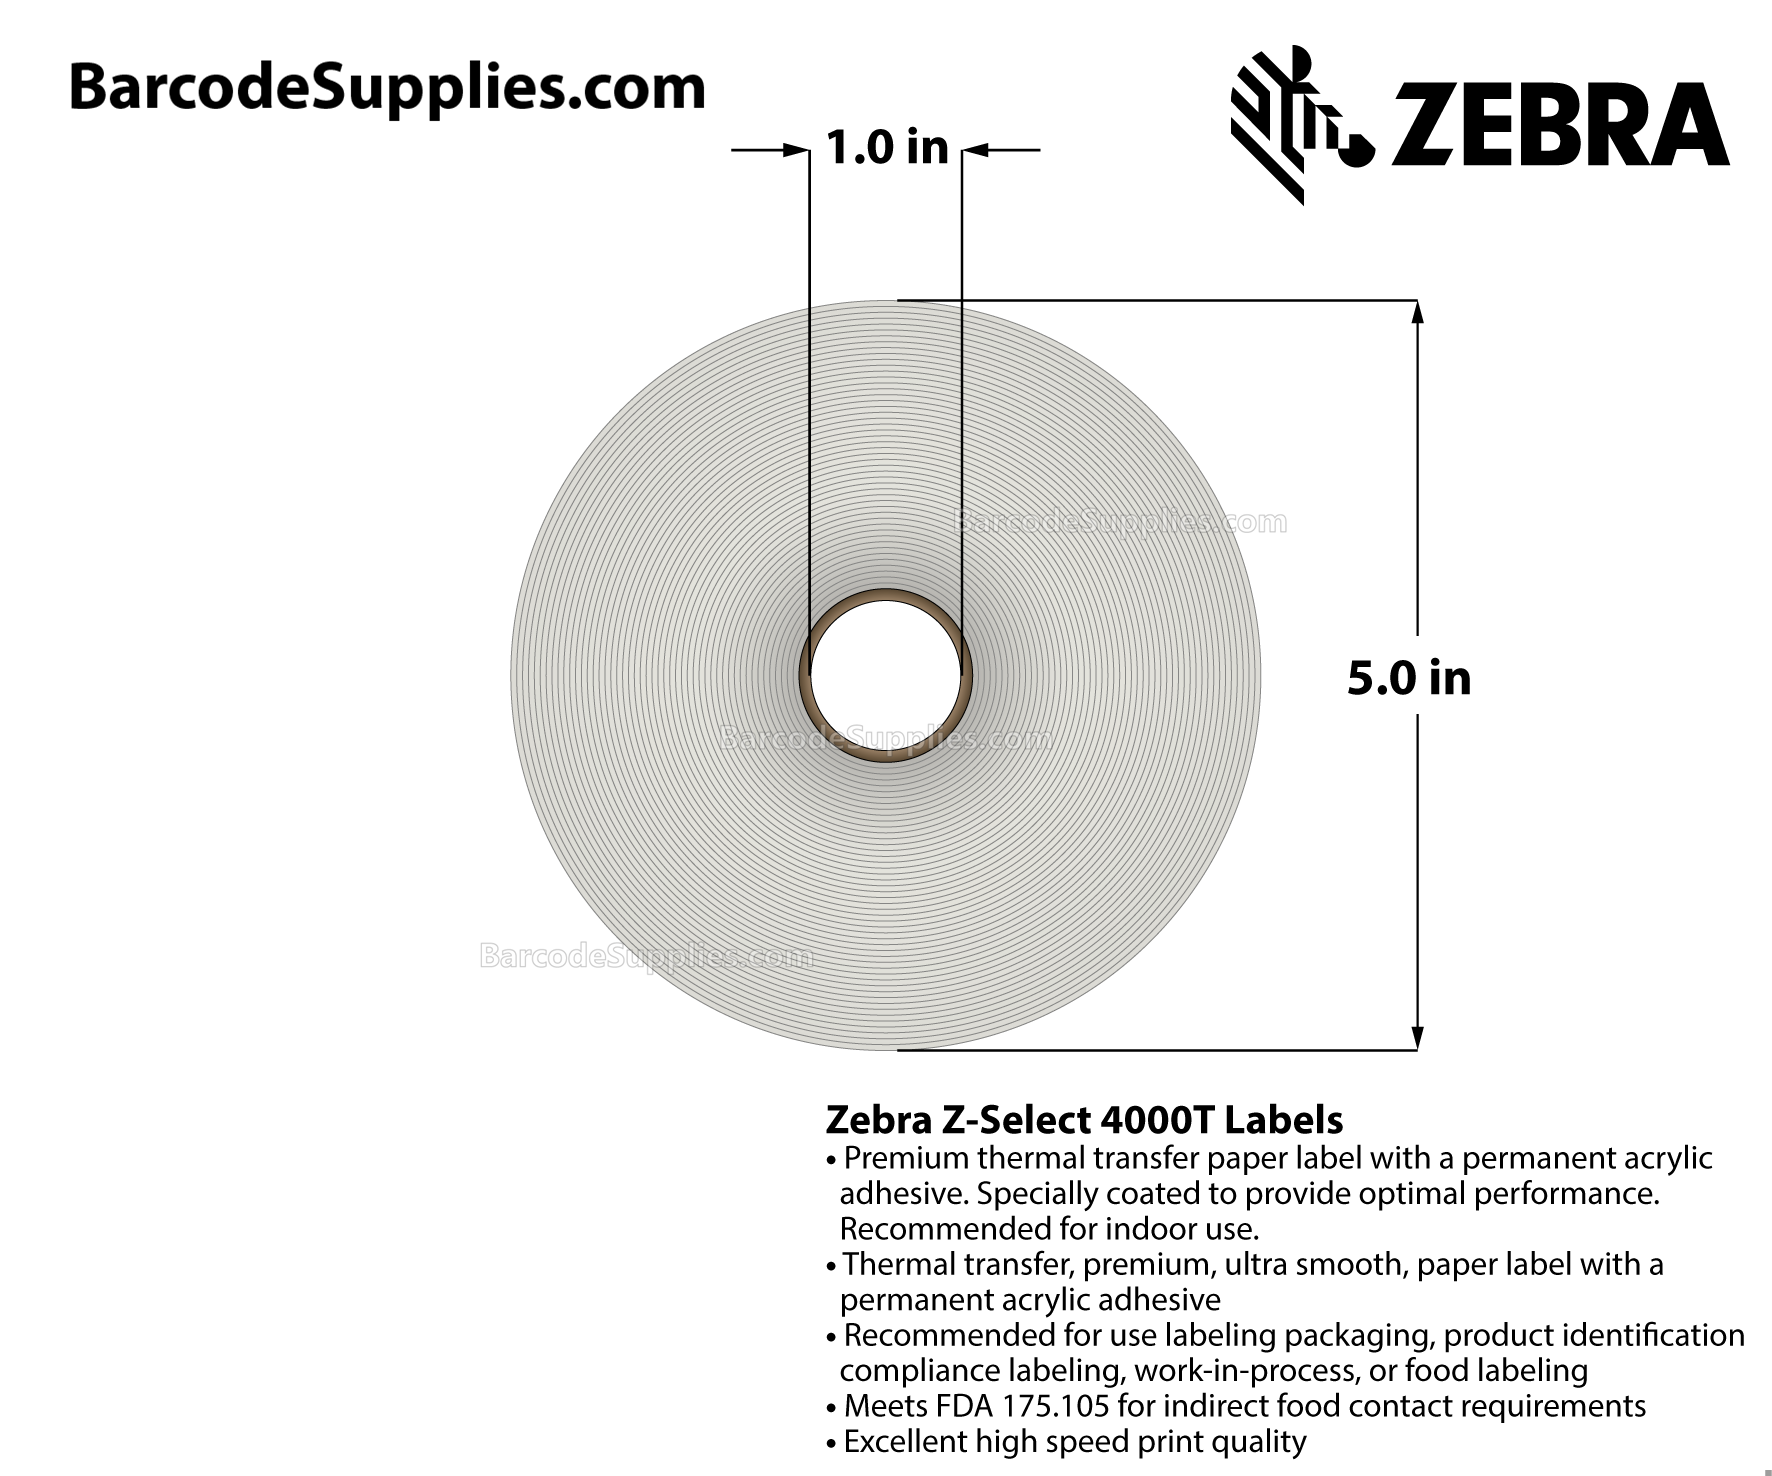 4 x 6 Thermal Transfer White Z-Select 4000T Labels With Permanent Adhesive - Perforated - 475 Labels Per Roll - Carton Of 12 Rolls - 5700 Labels Total - MPN: 800274-605